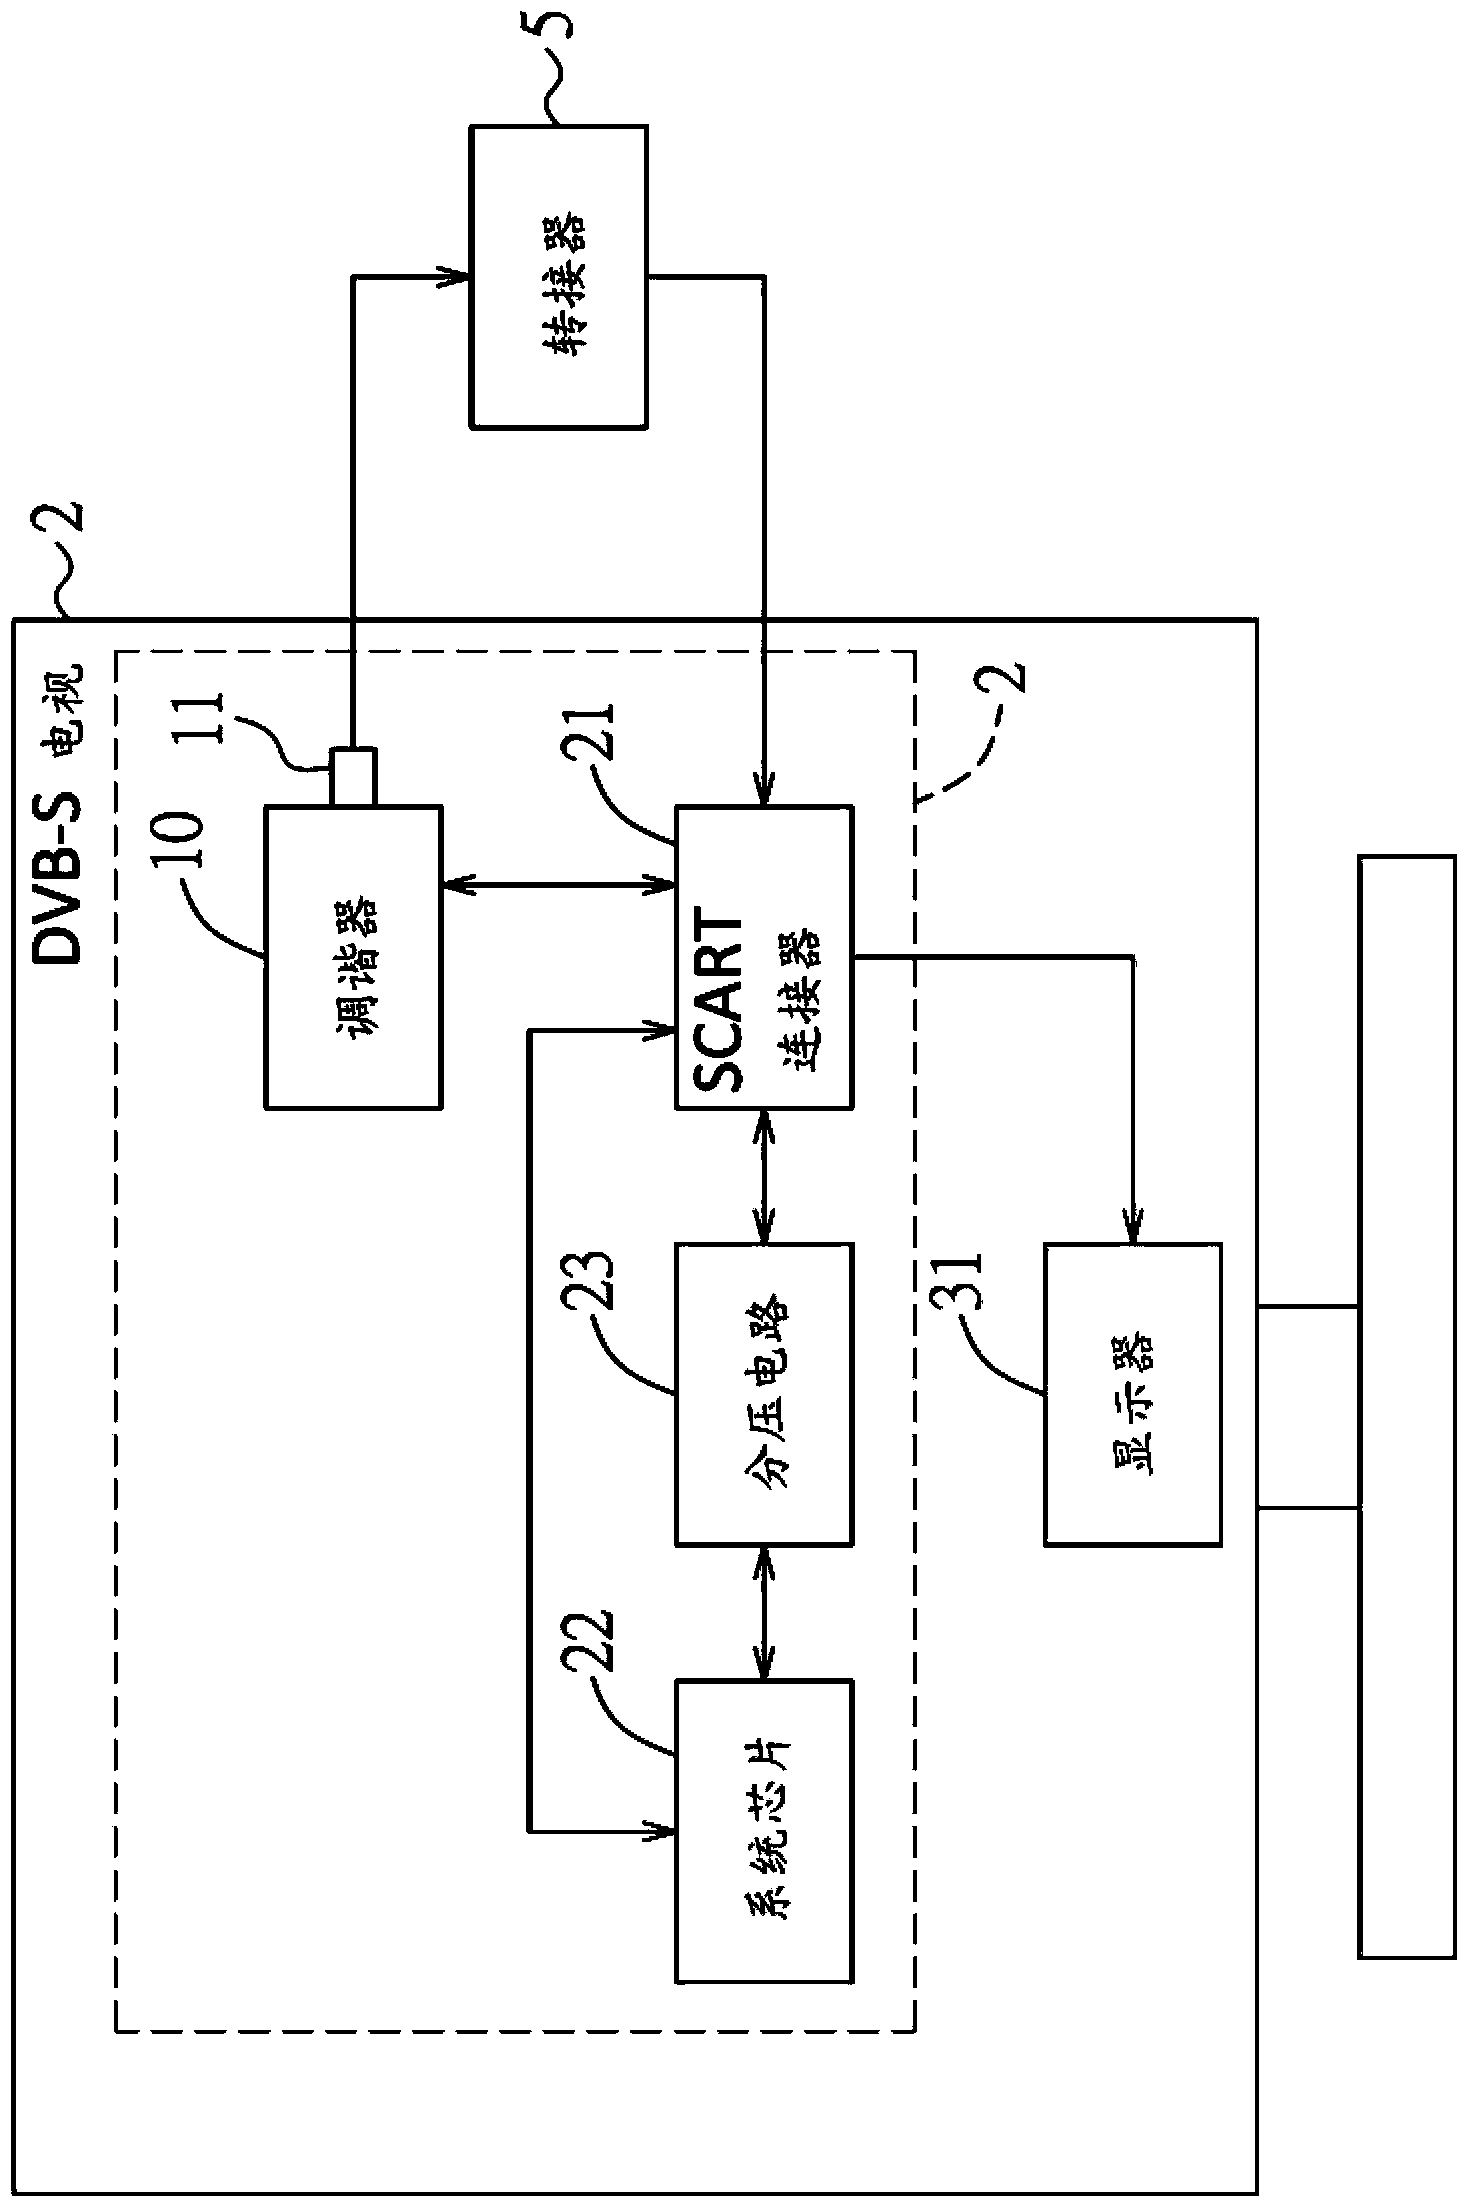 Method for detecting an output voltage of a tuner of a receiver deceiver, an adapter and the receiver device